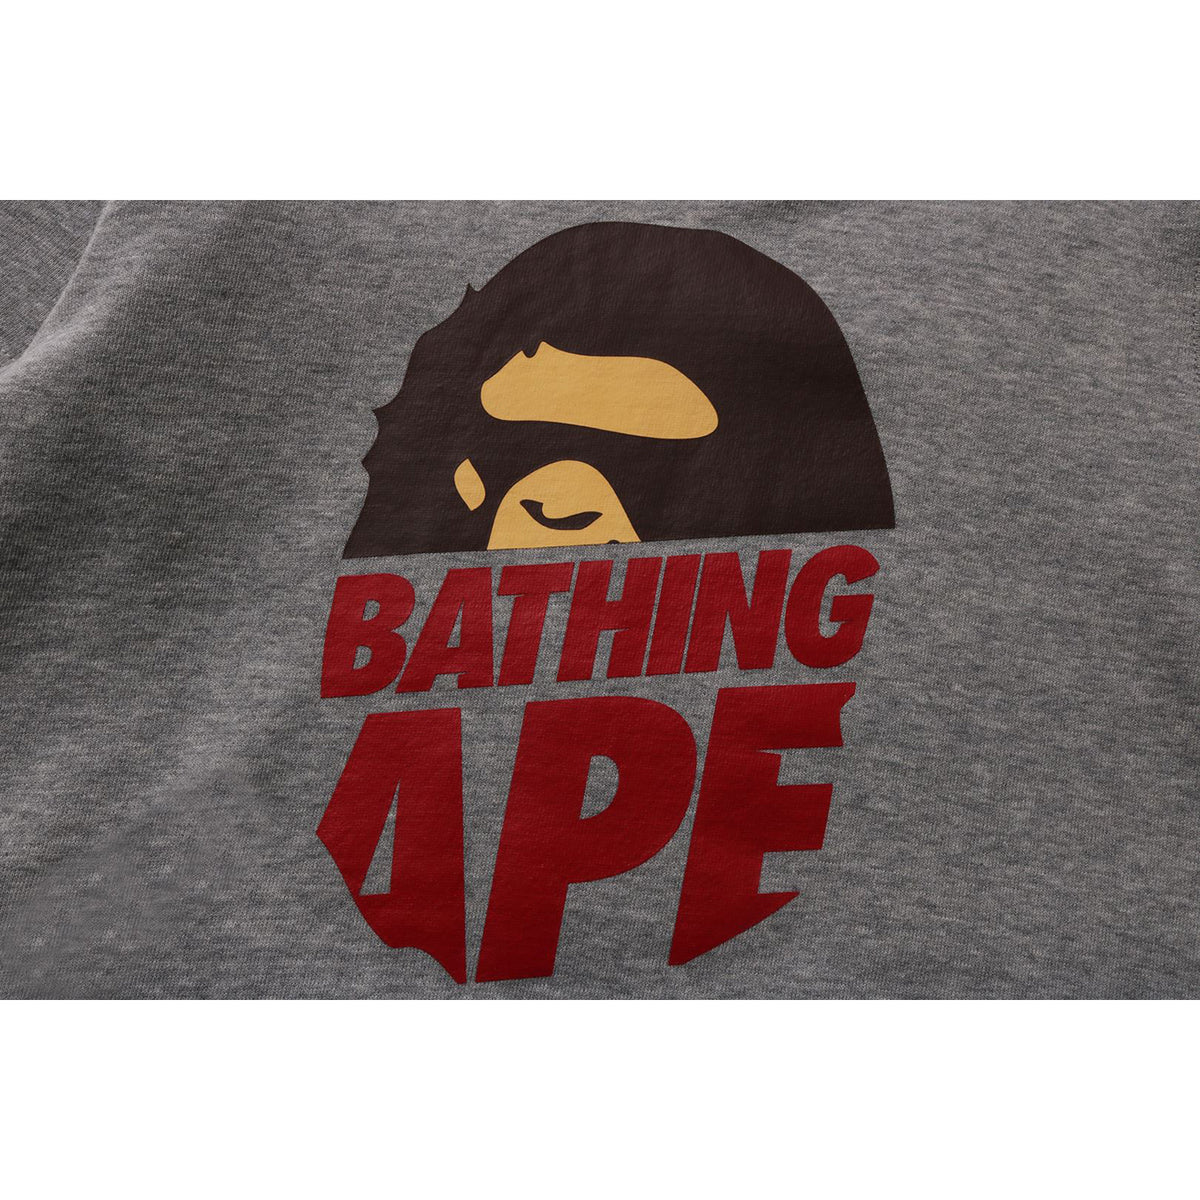 COLOR CAMO APE HEAD LAYERED PULLOVER HOODIE KIDS